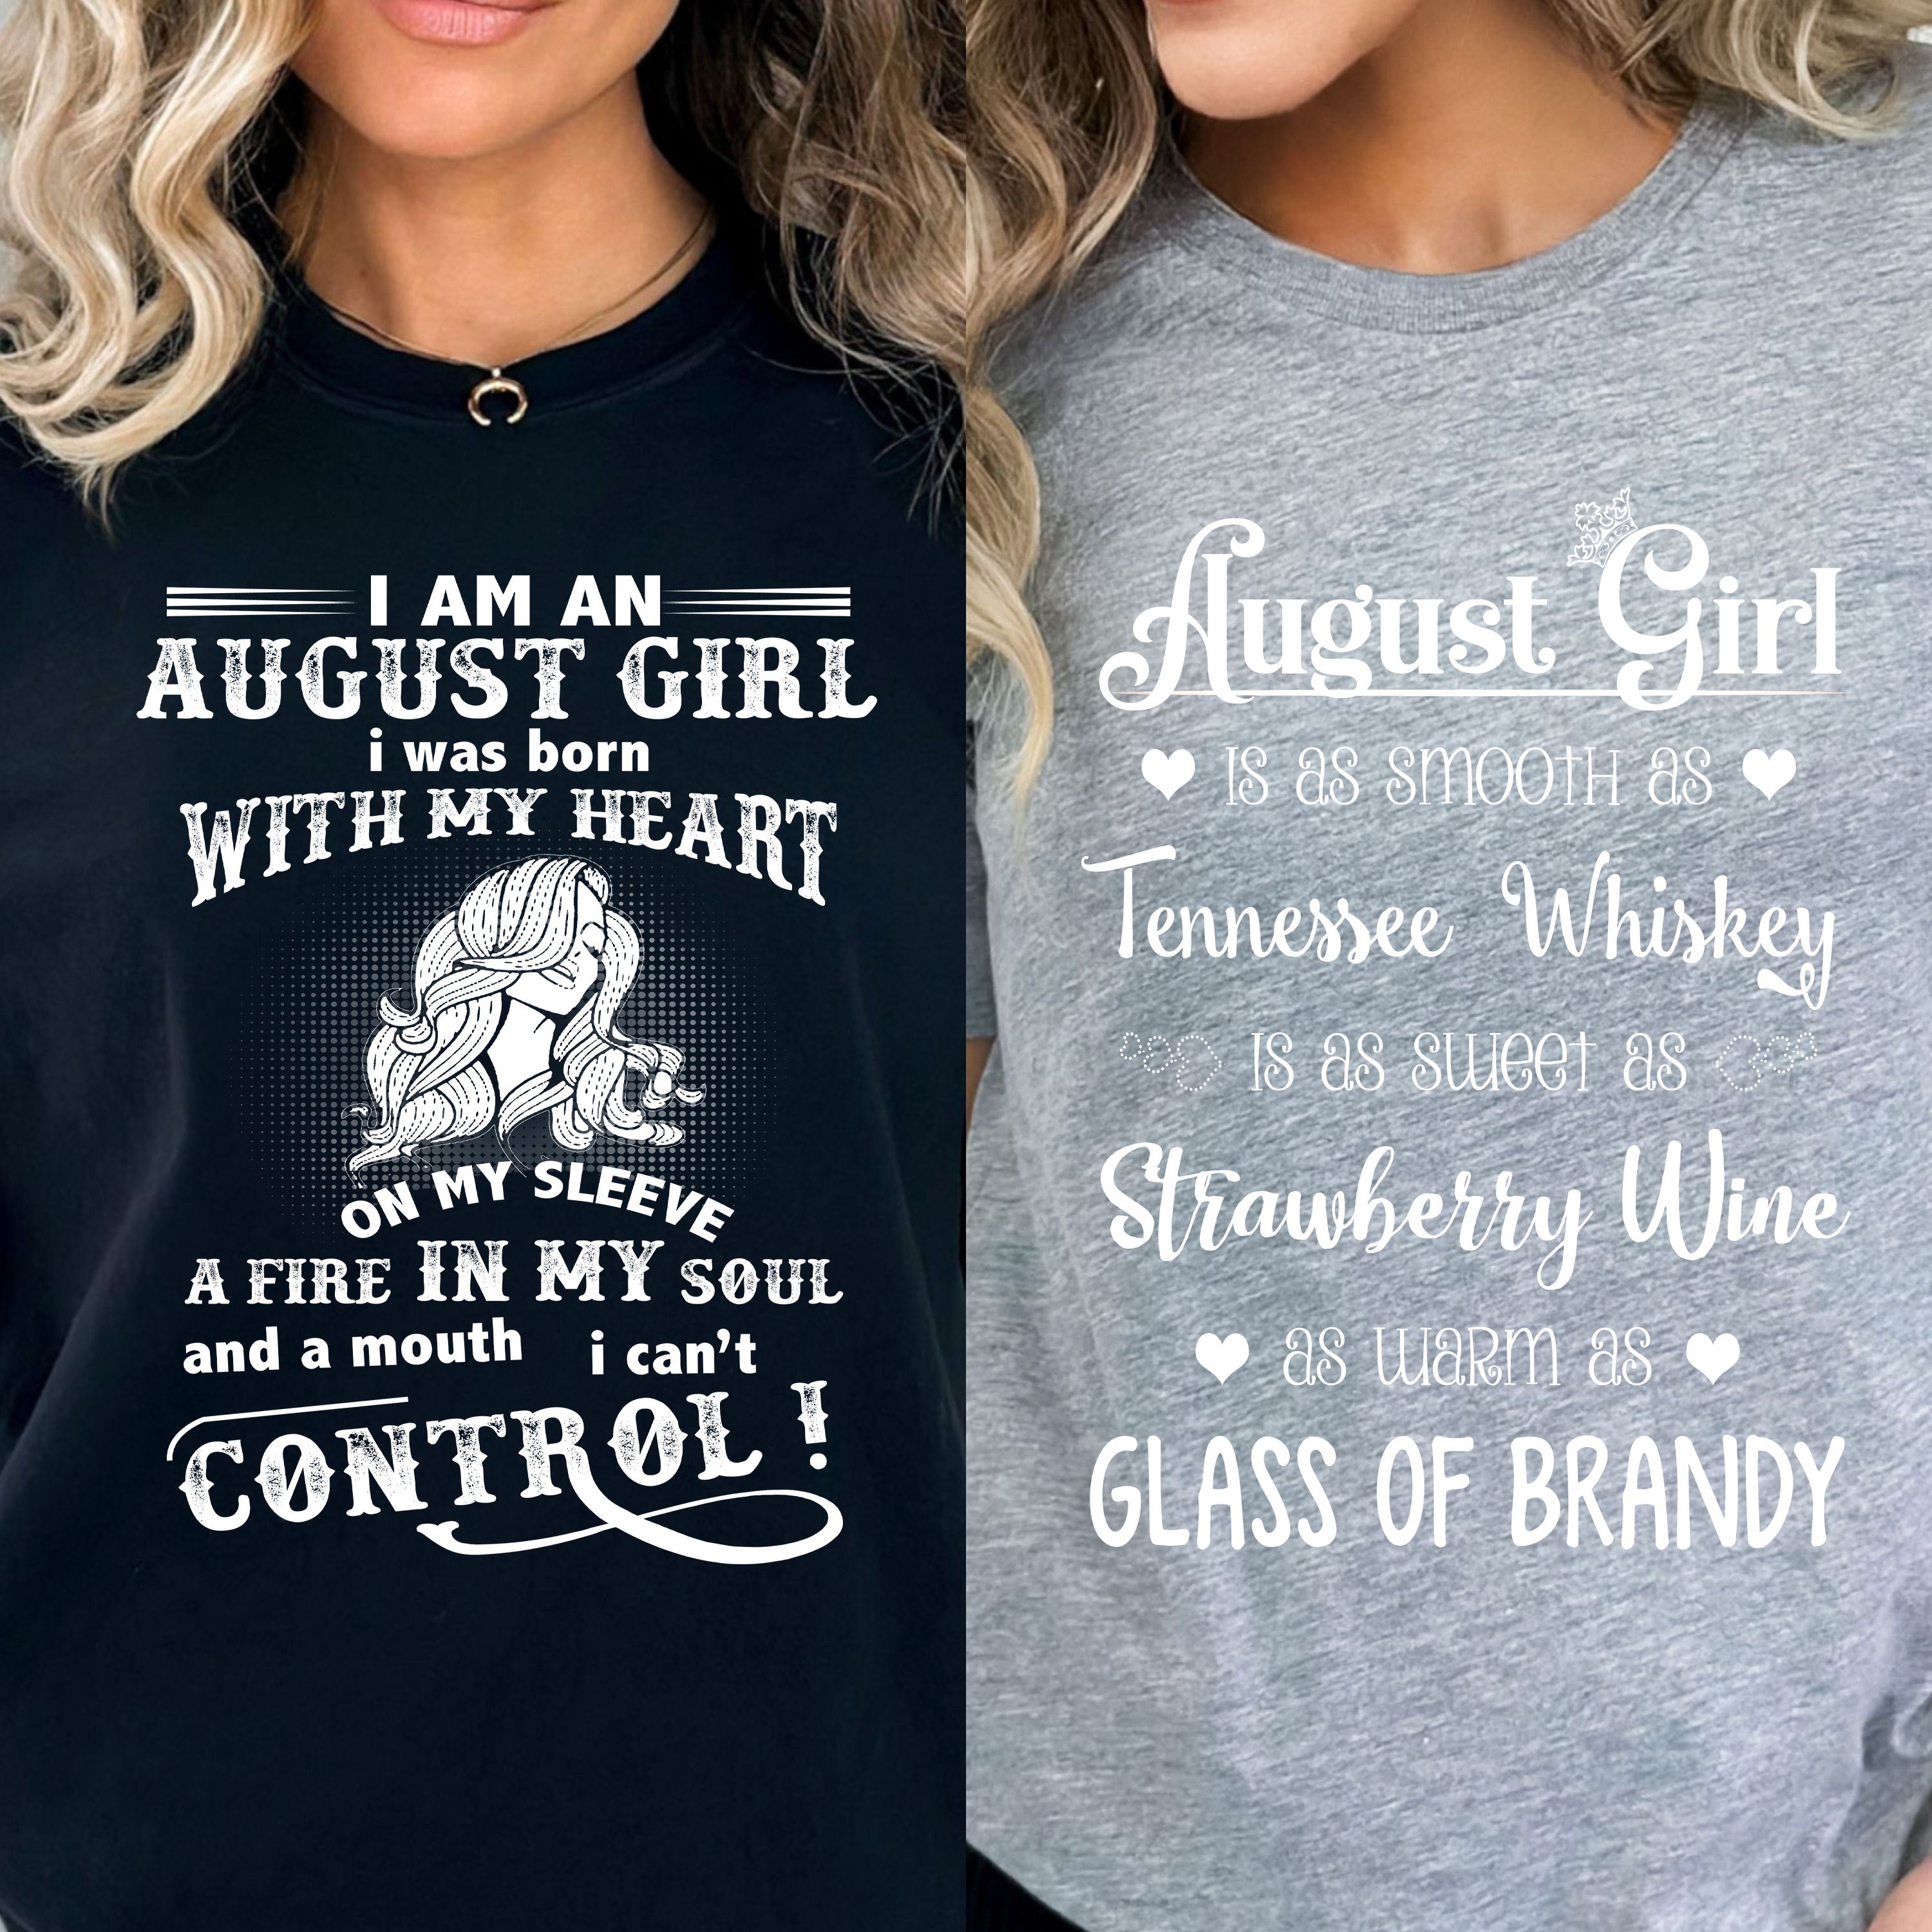 "August Whiskey + Control -Pack of 2".